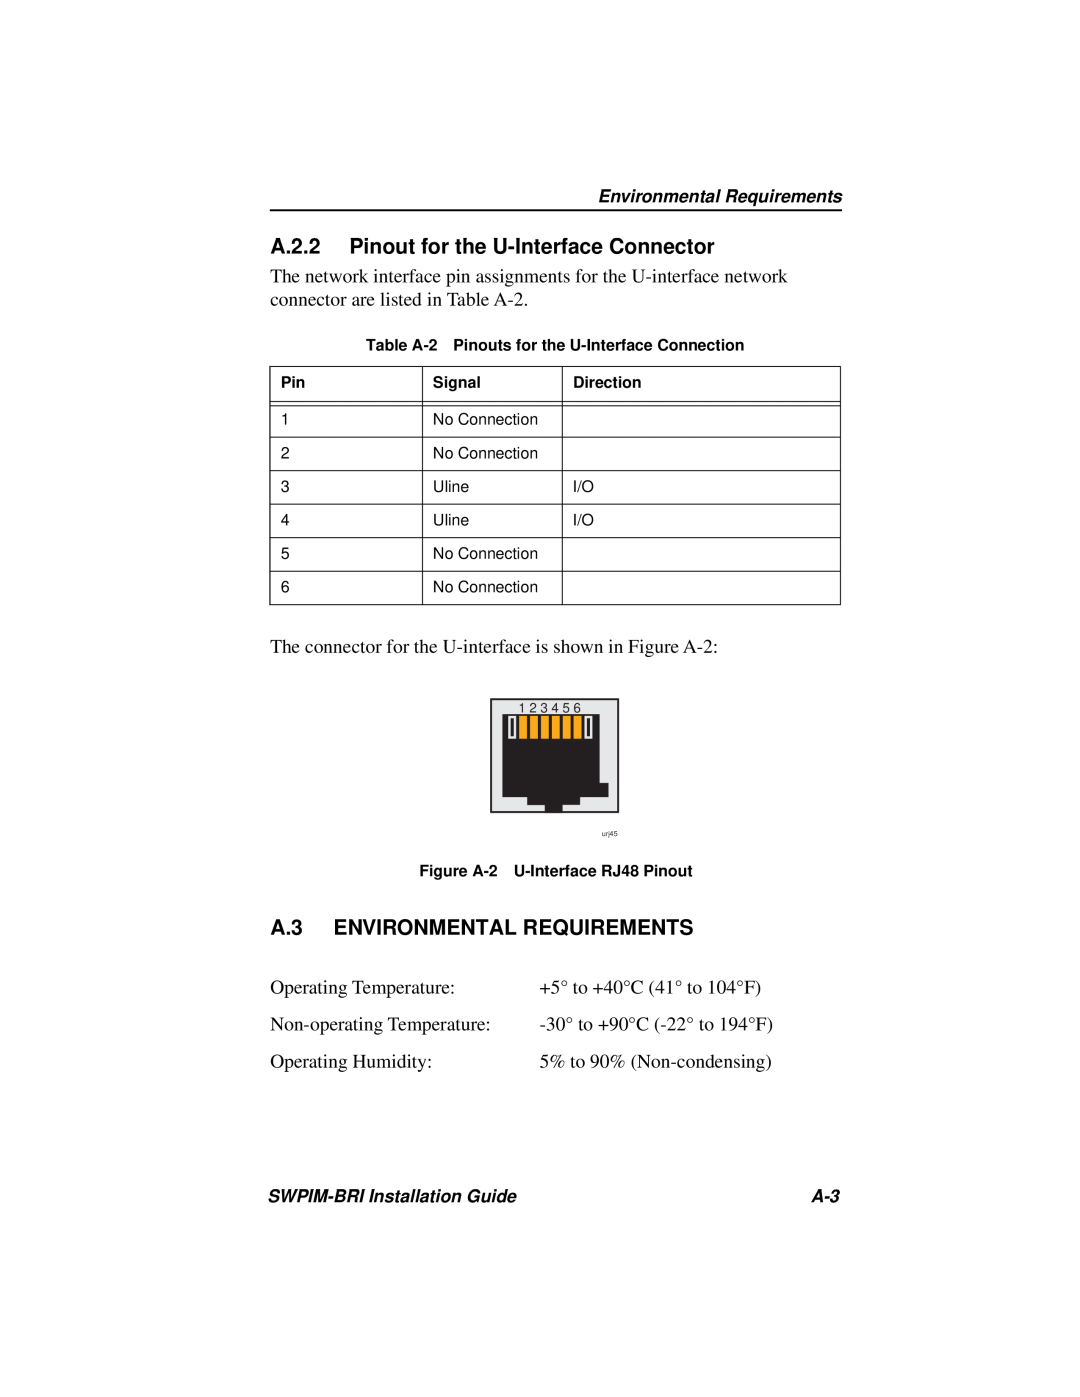 Cabletron Systems SWPIM-BRI manual A.2.2 Pinout for the U-Interface Connector, A.3 ENVIRONMENTAL REQUIREMENTS 